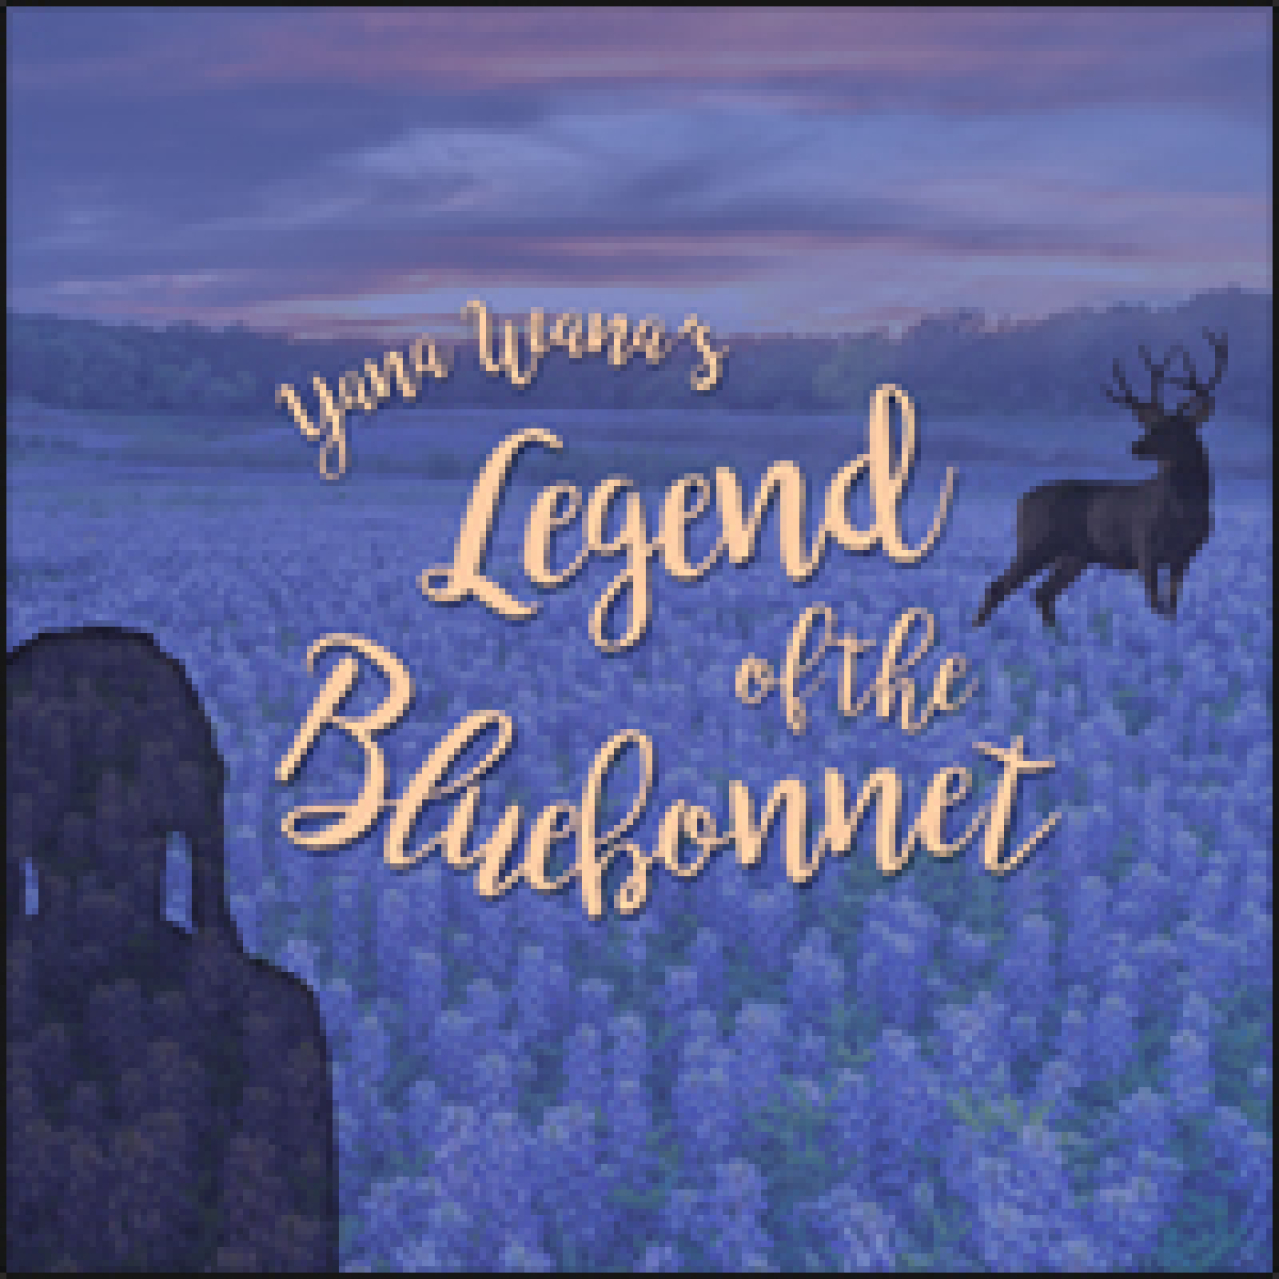 yana wanas legend of the bluebonnet logo Broadway shows and tickets